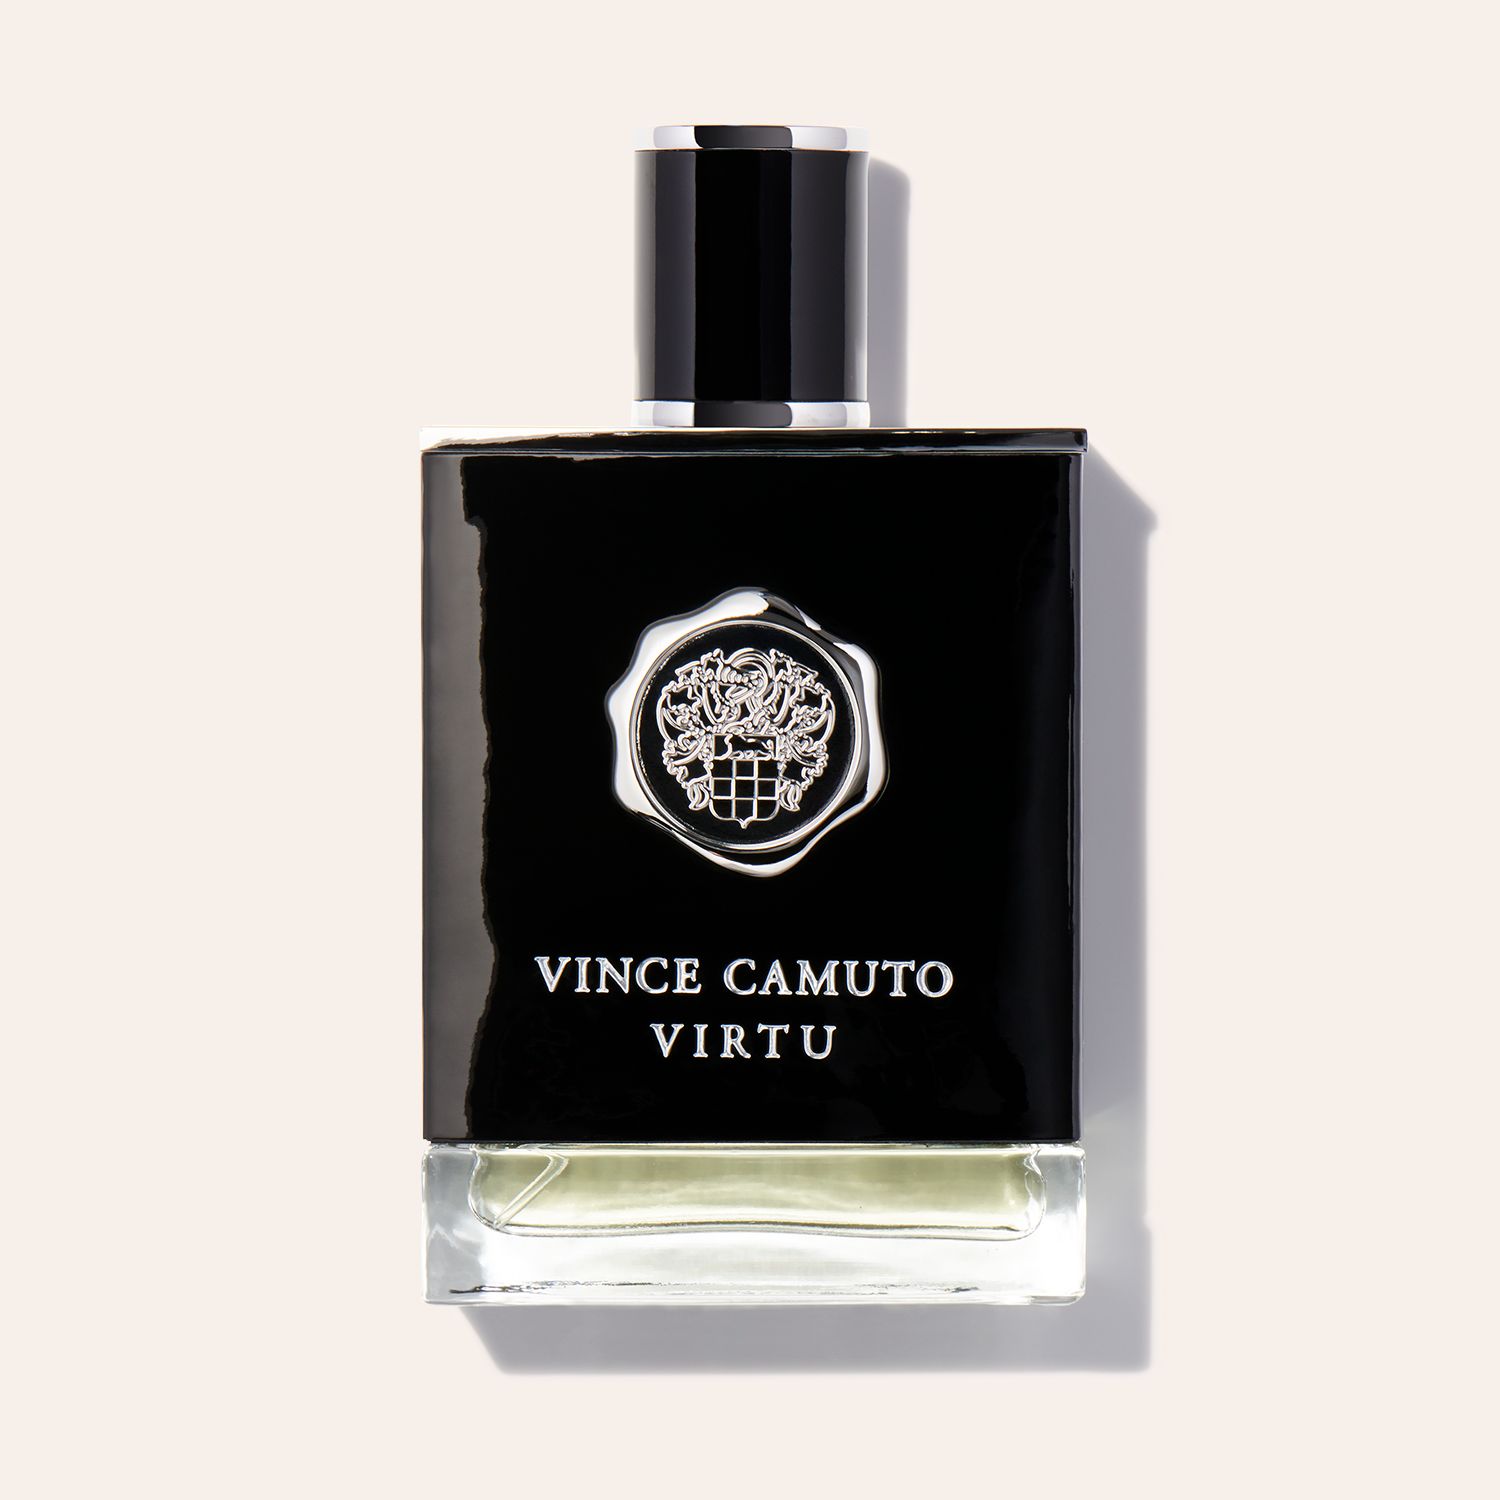 VINCE CAMUTO FLOREALE Perfume Haul & First Impression 